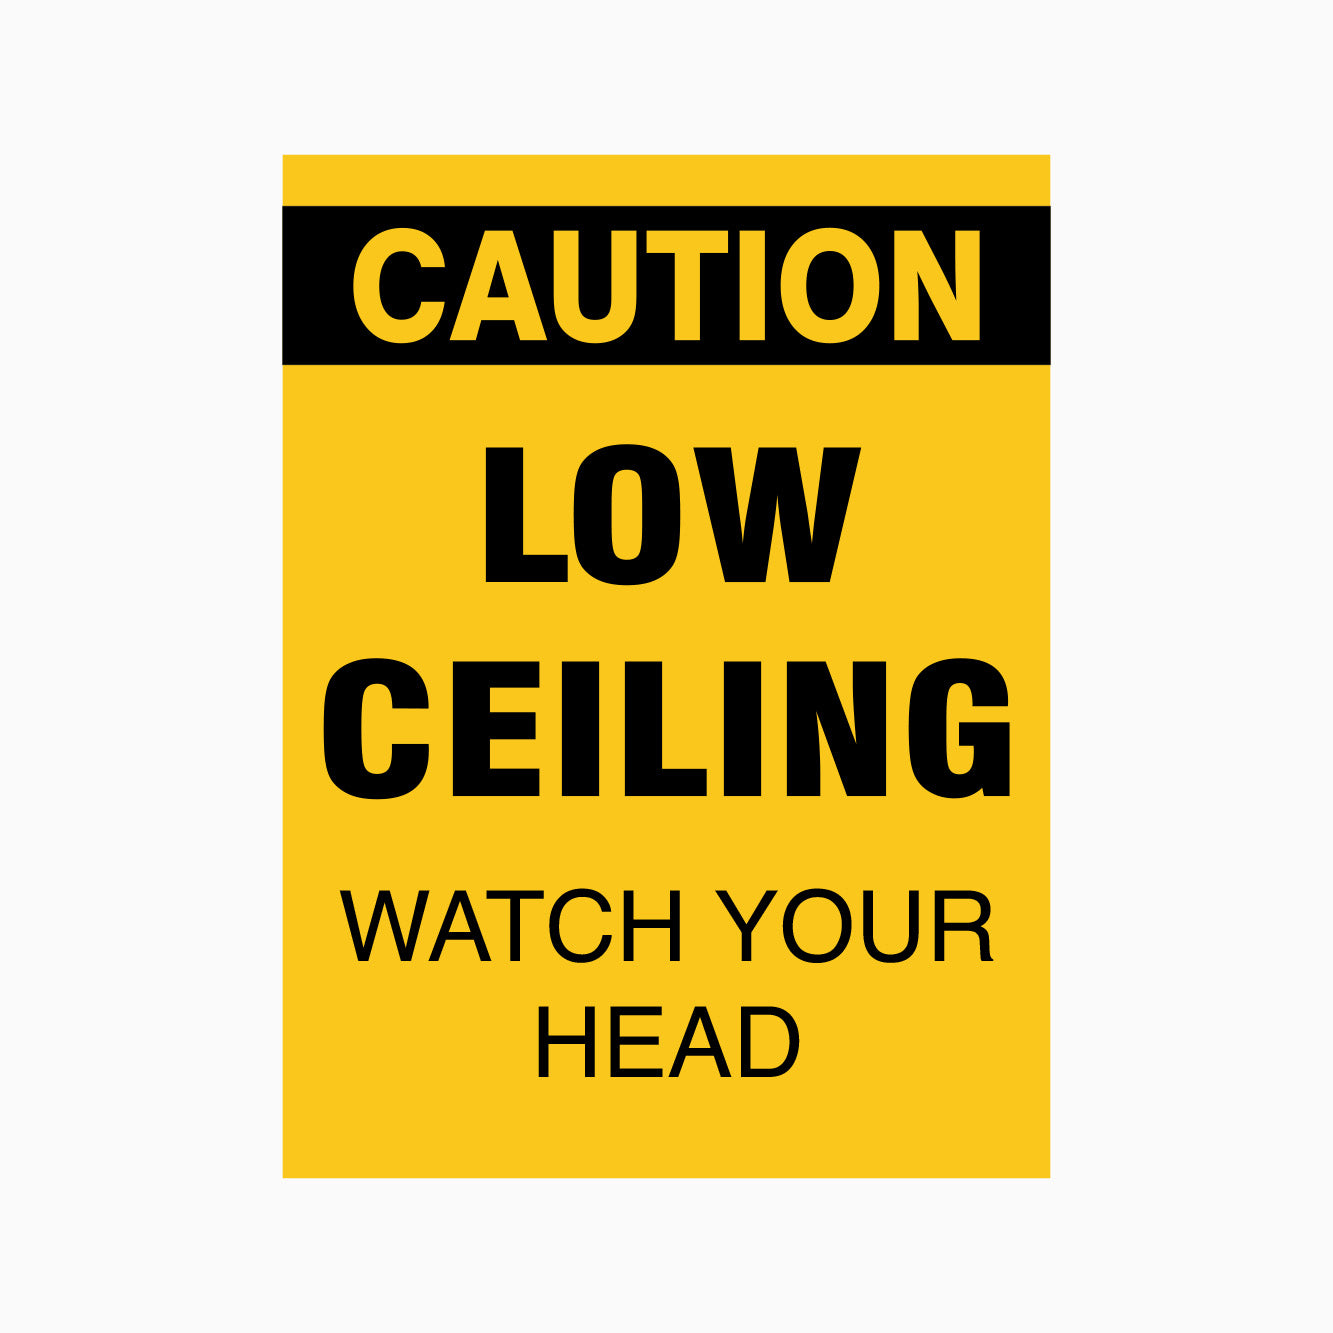 CAUTION LOW CEILING WATCH YOUR HEAD SIGN